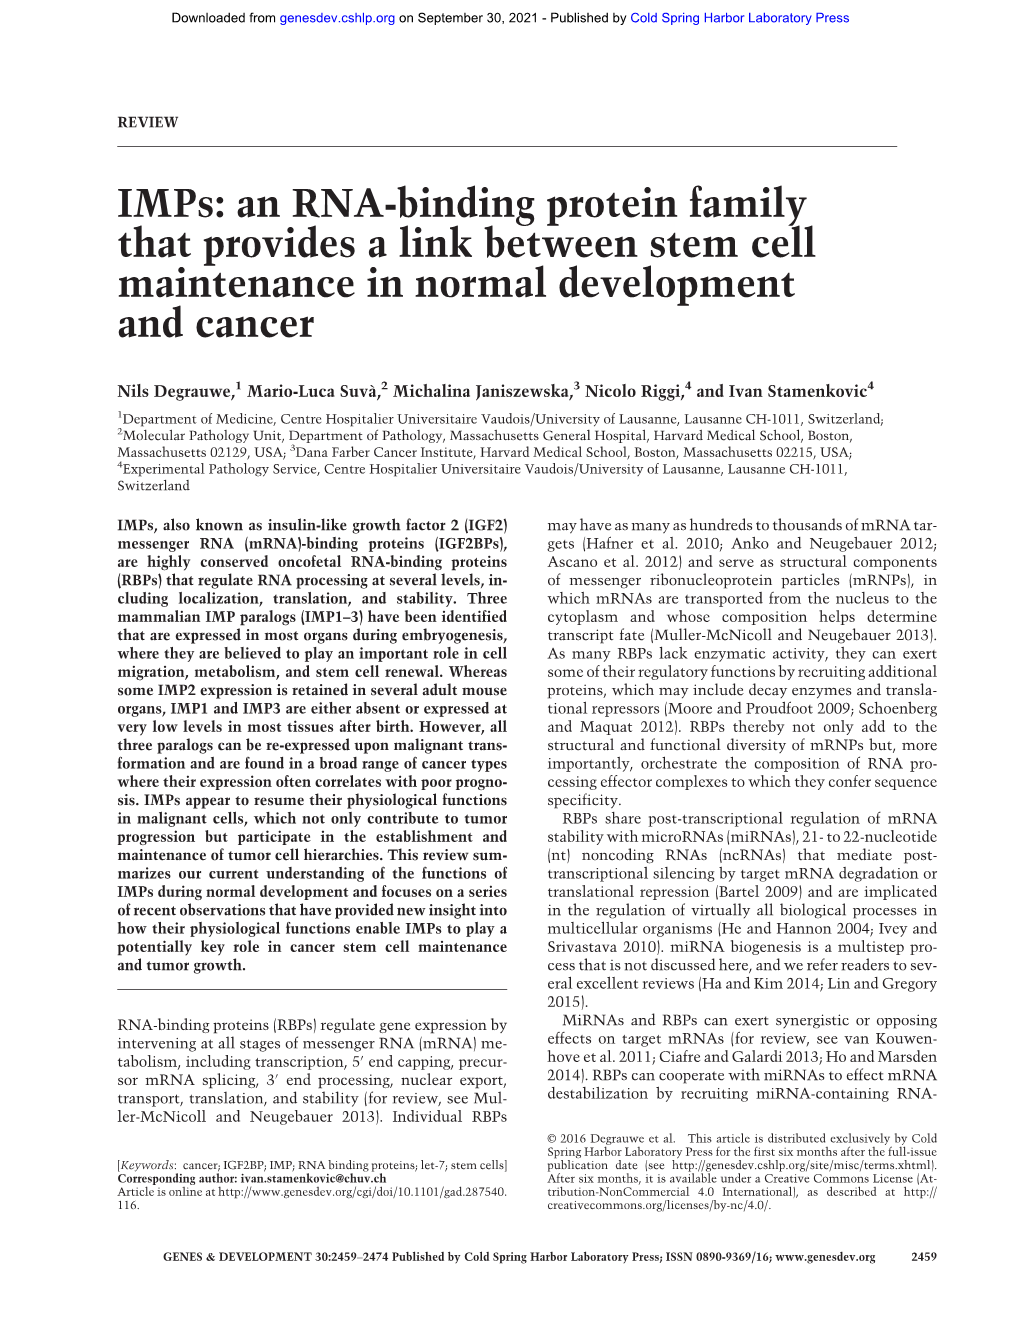 An RNA-Binding Protein Family That Provides a Link Between Stem Cell Maintenance in Normal Development and Cancer